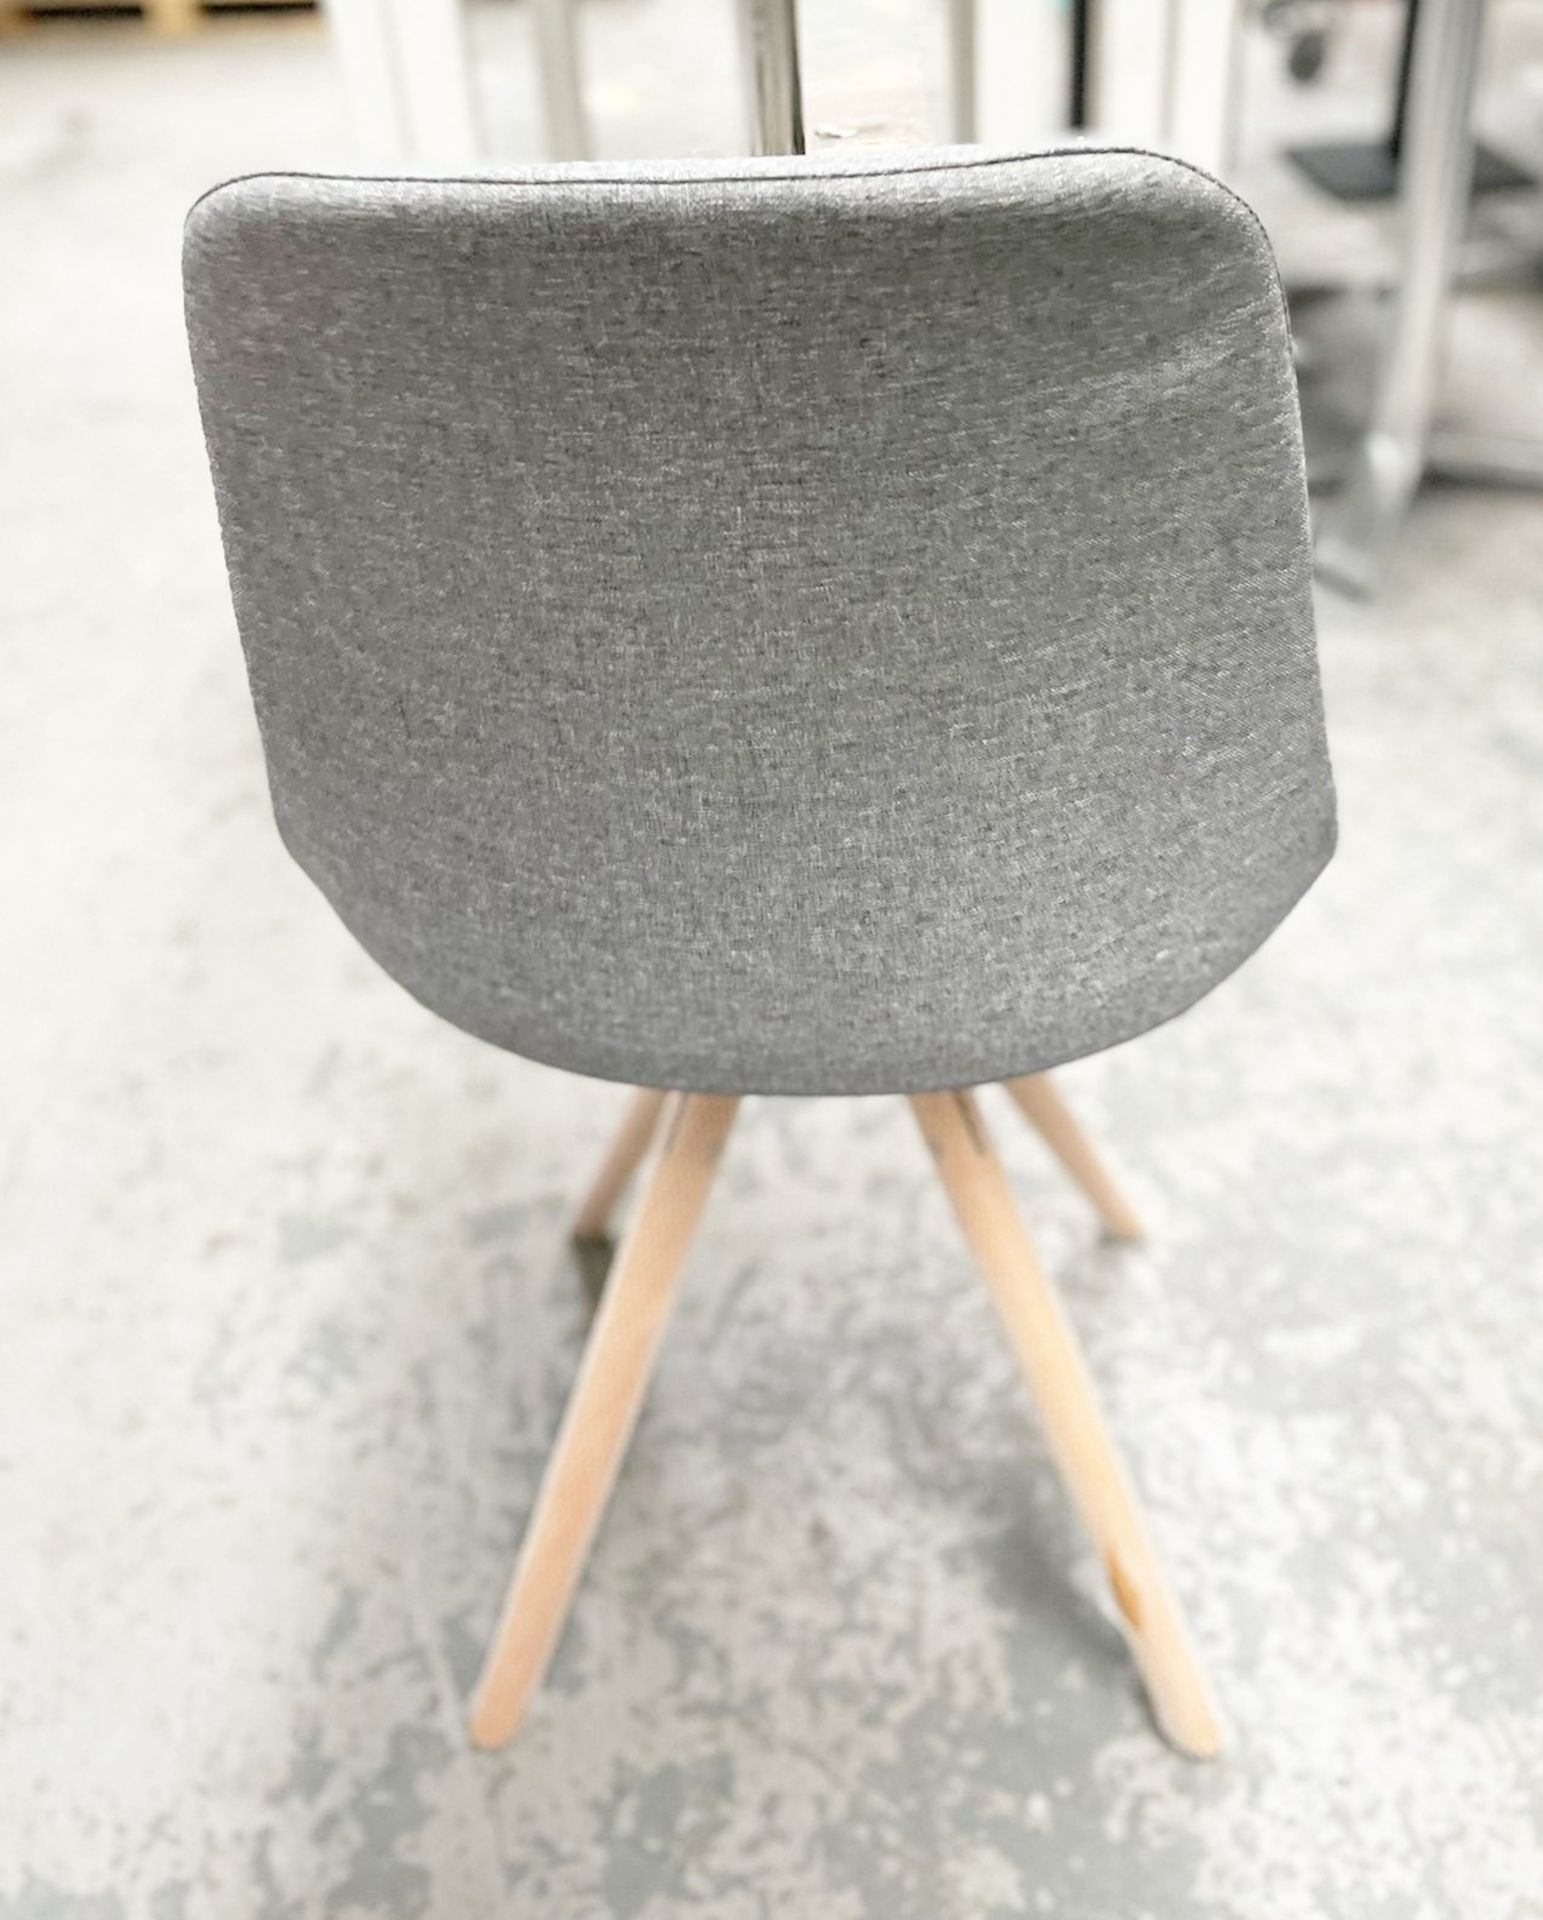 4 x Upholstered Turner Chair In Grey- Dimensions: 86(h) x 50(w) x 40(d) cm - Brand New Unboxed - Image 3 of 6